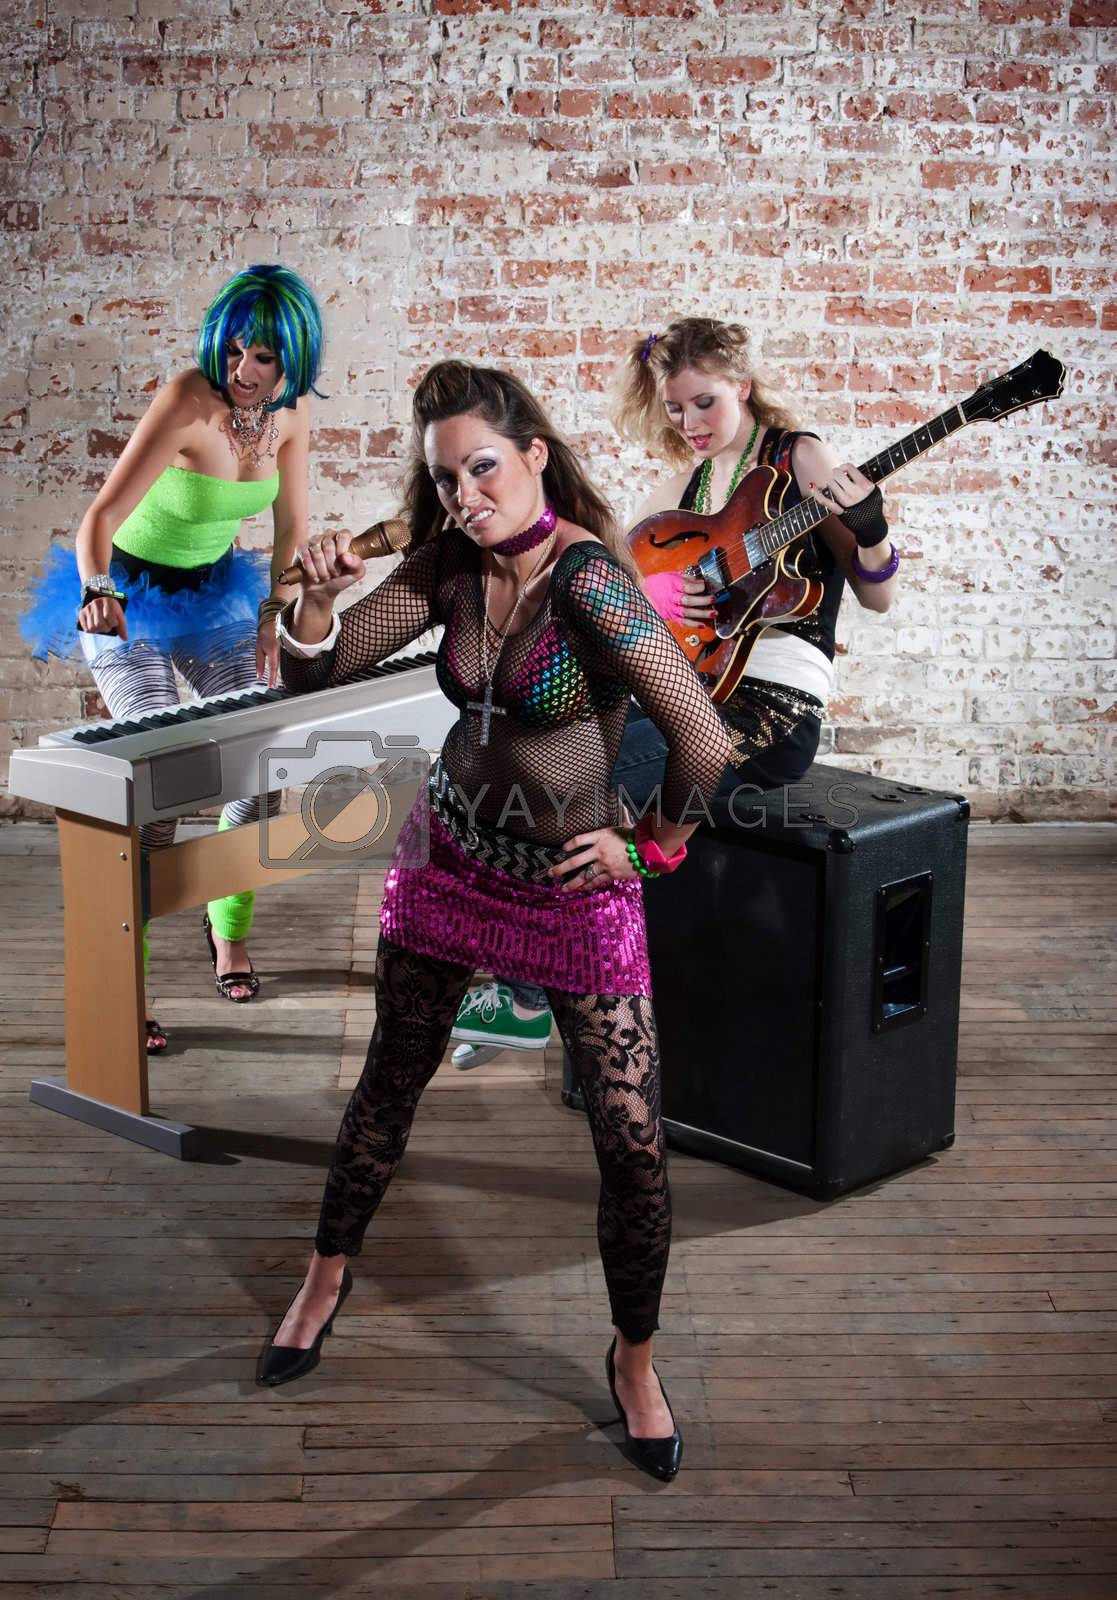 Royalty free image of Female punk rock band by Creatista